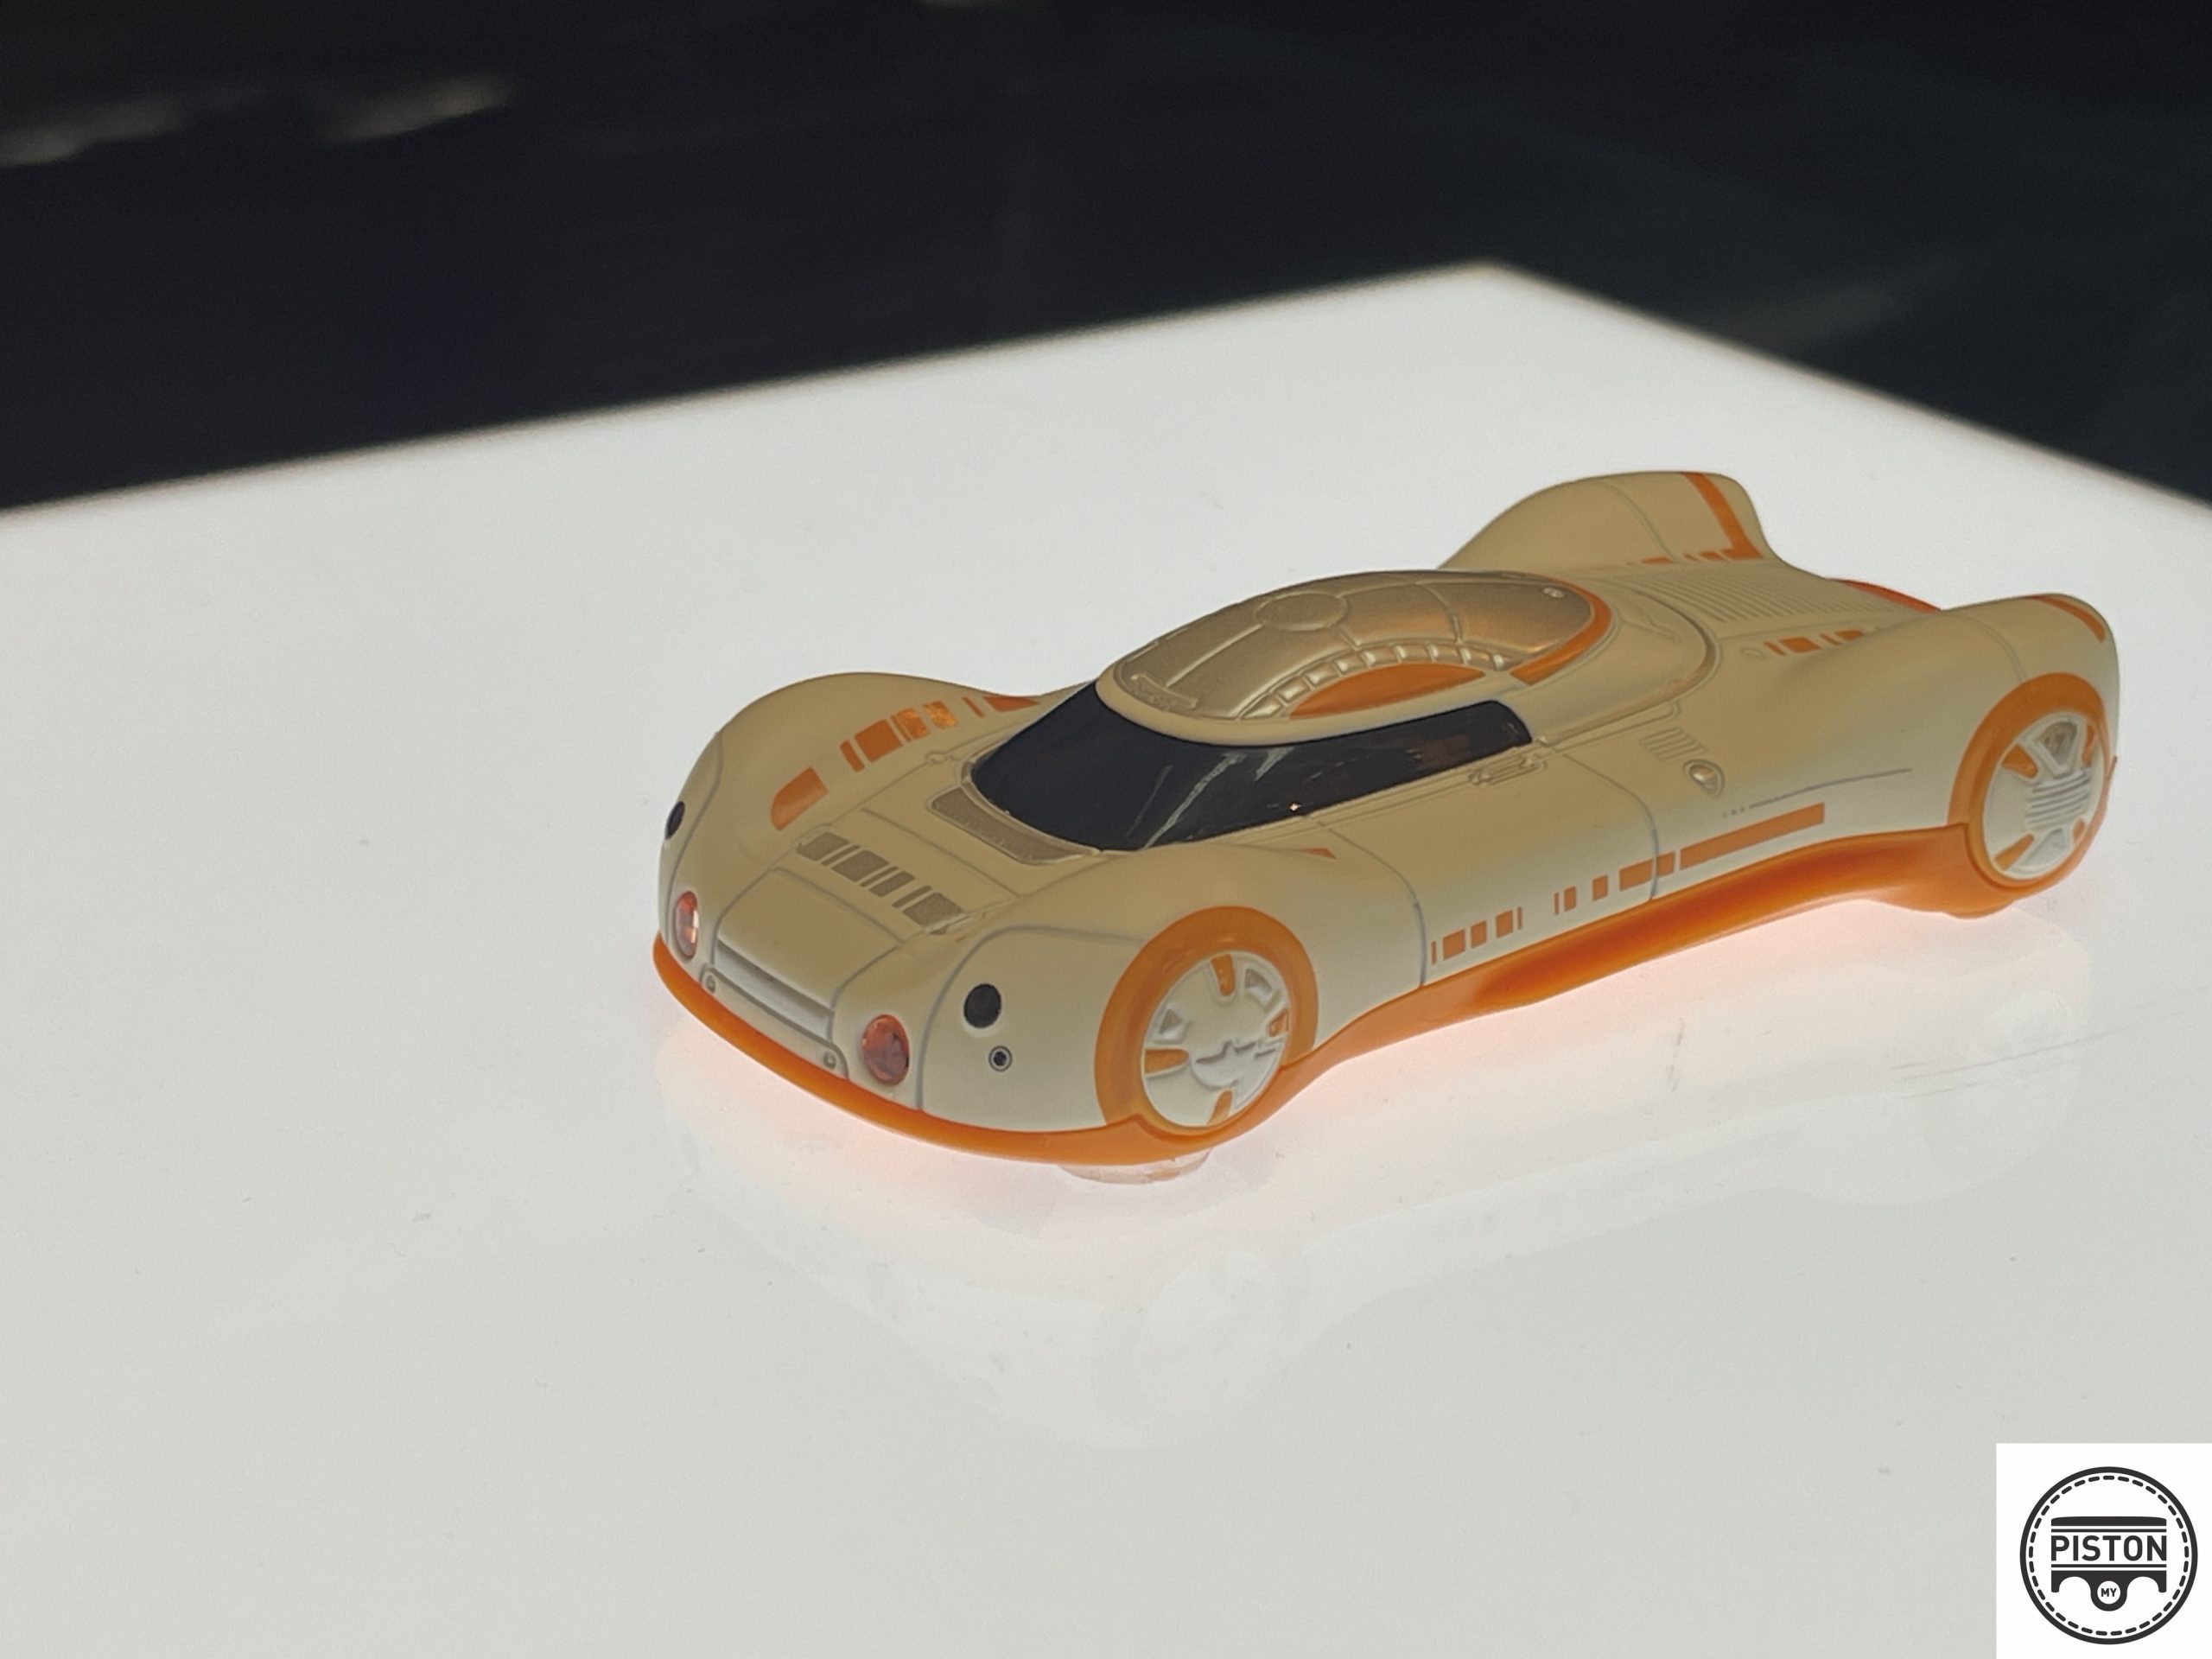 shell malaysia launches star wars rc car collection